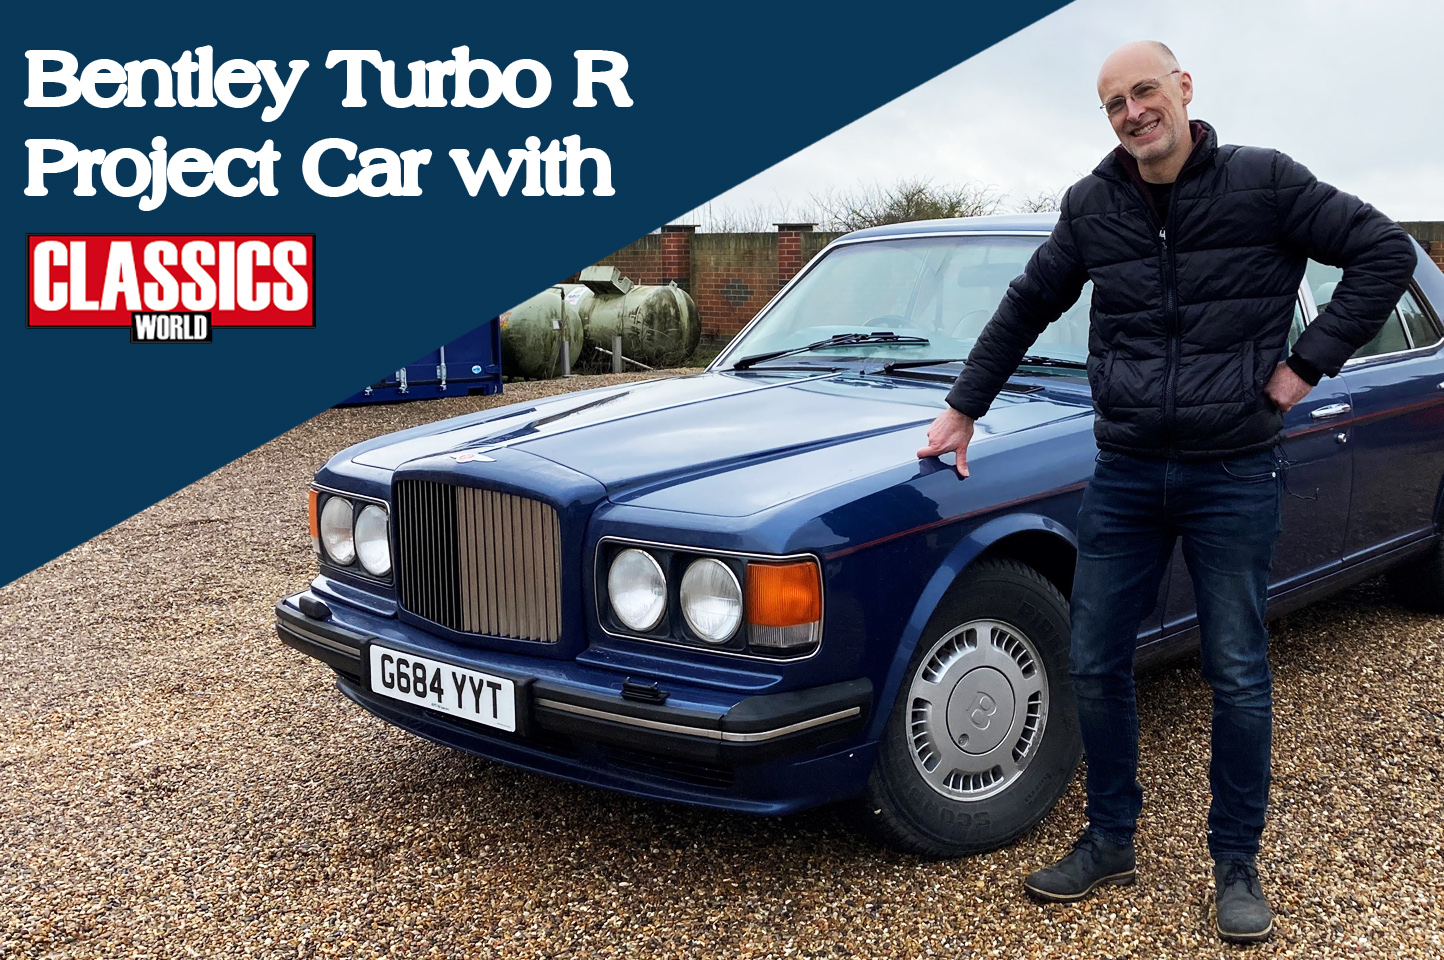 Flying Spares teams up with Classics World to work on a Bentley Turbo R project car